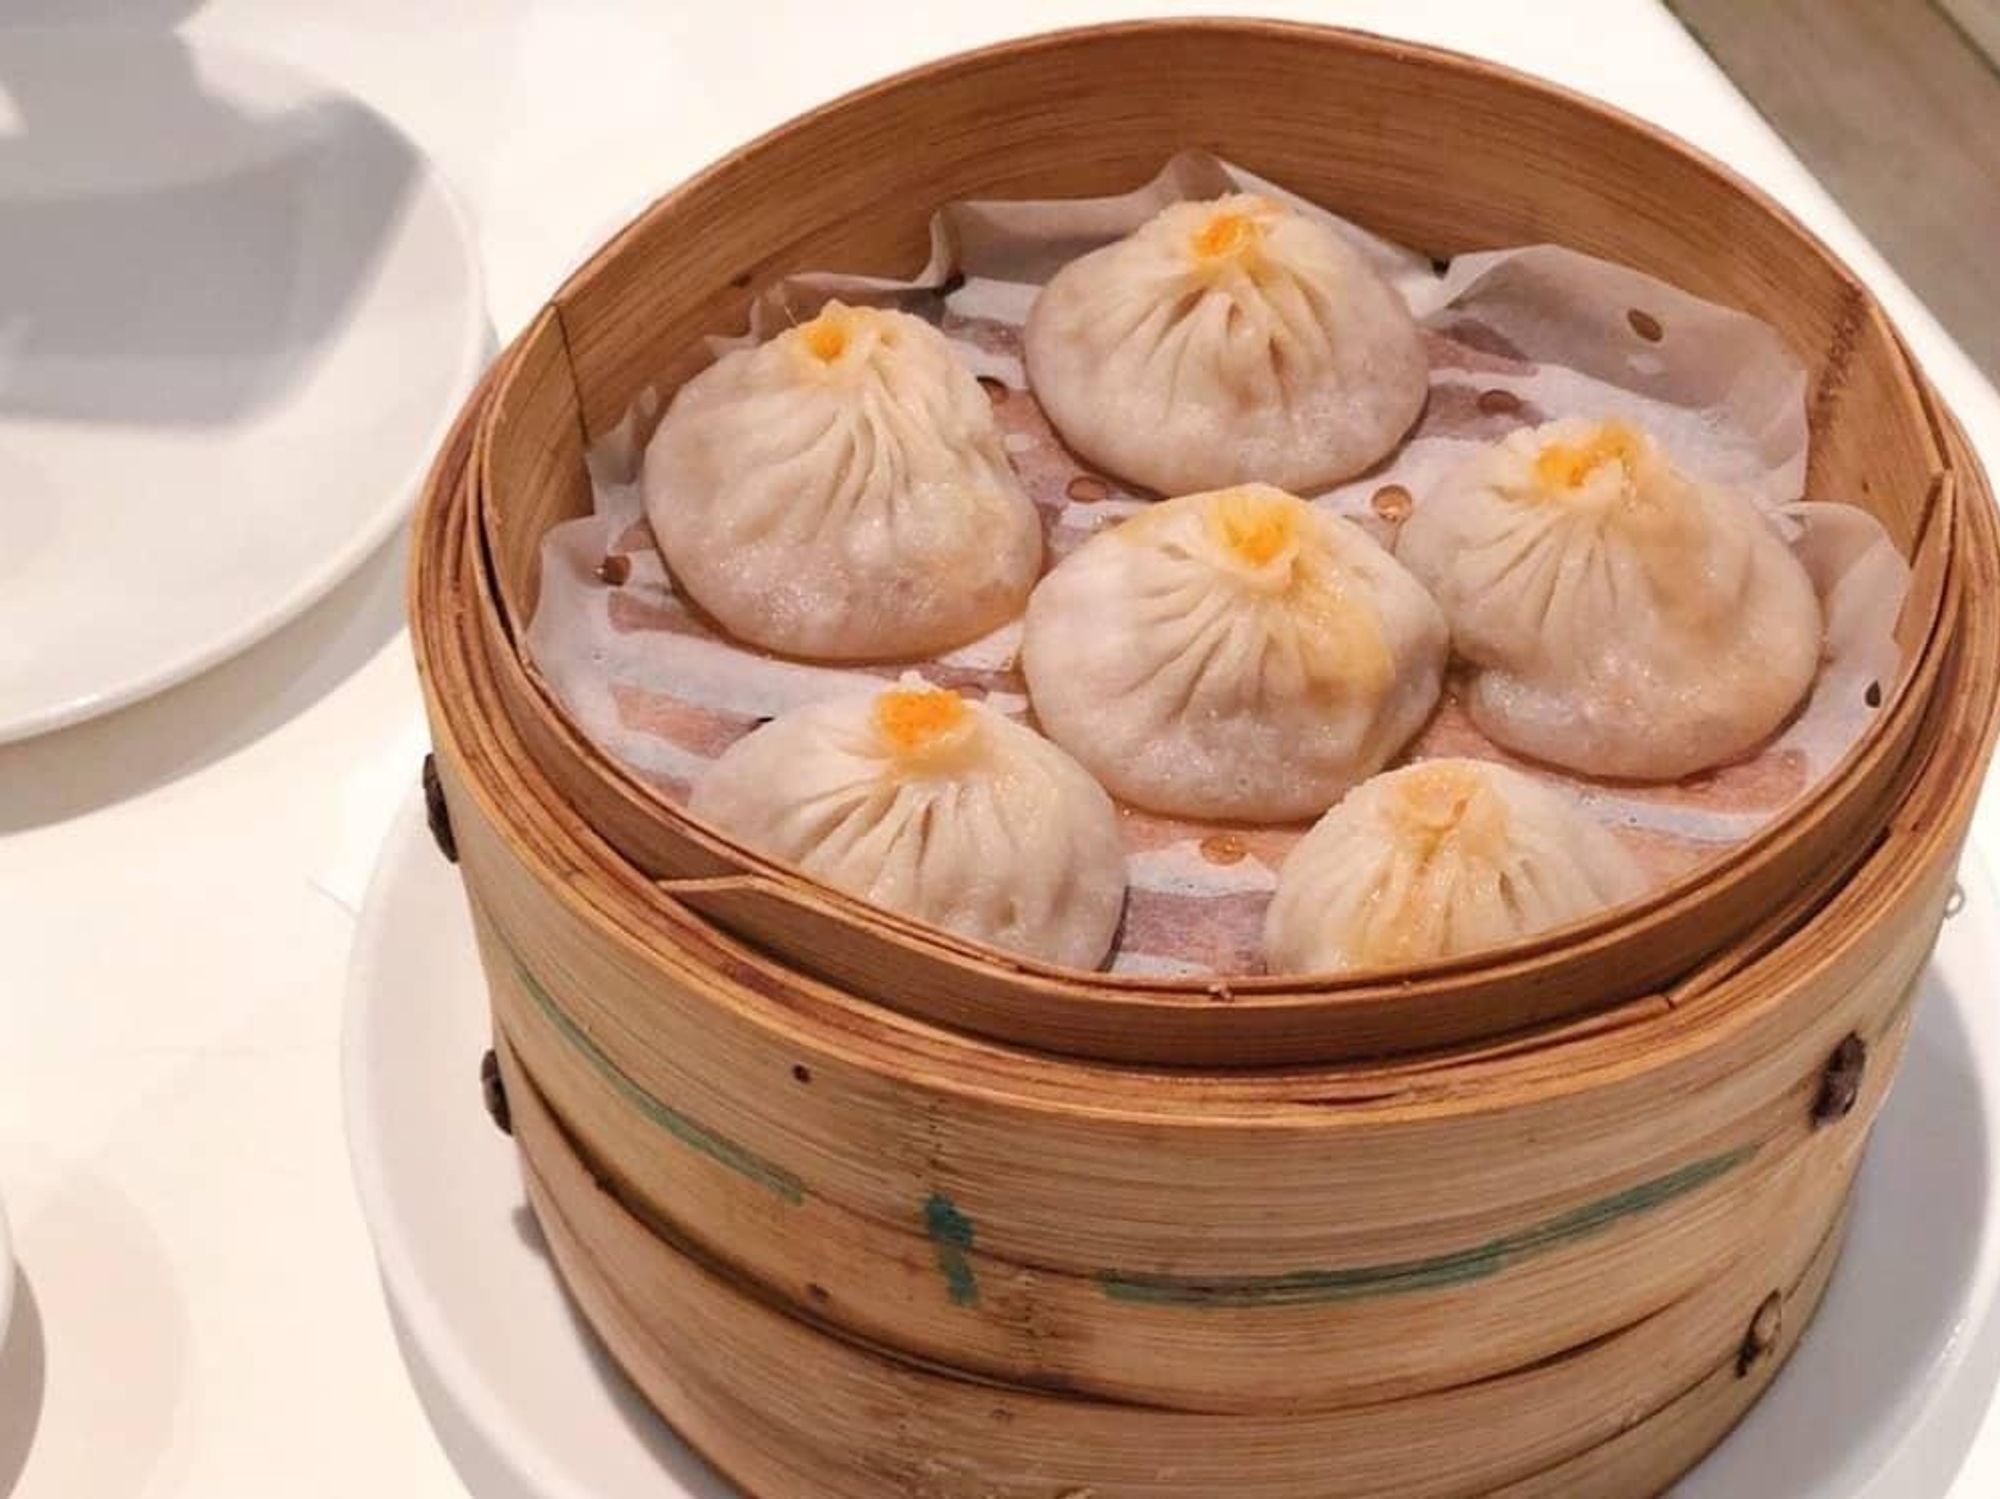 Dig Into Dim Sum at These 16 Houston Restaurants